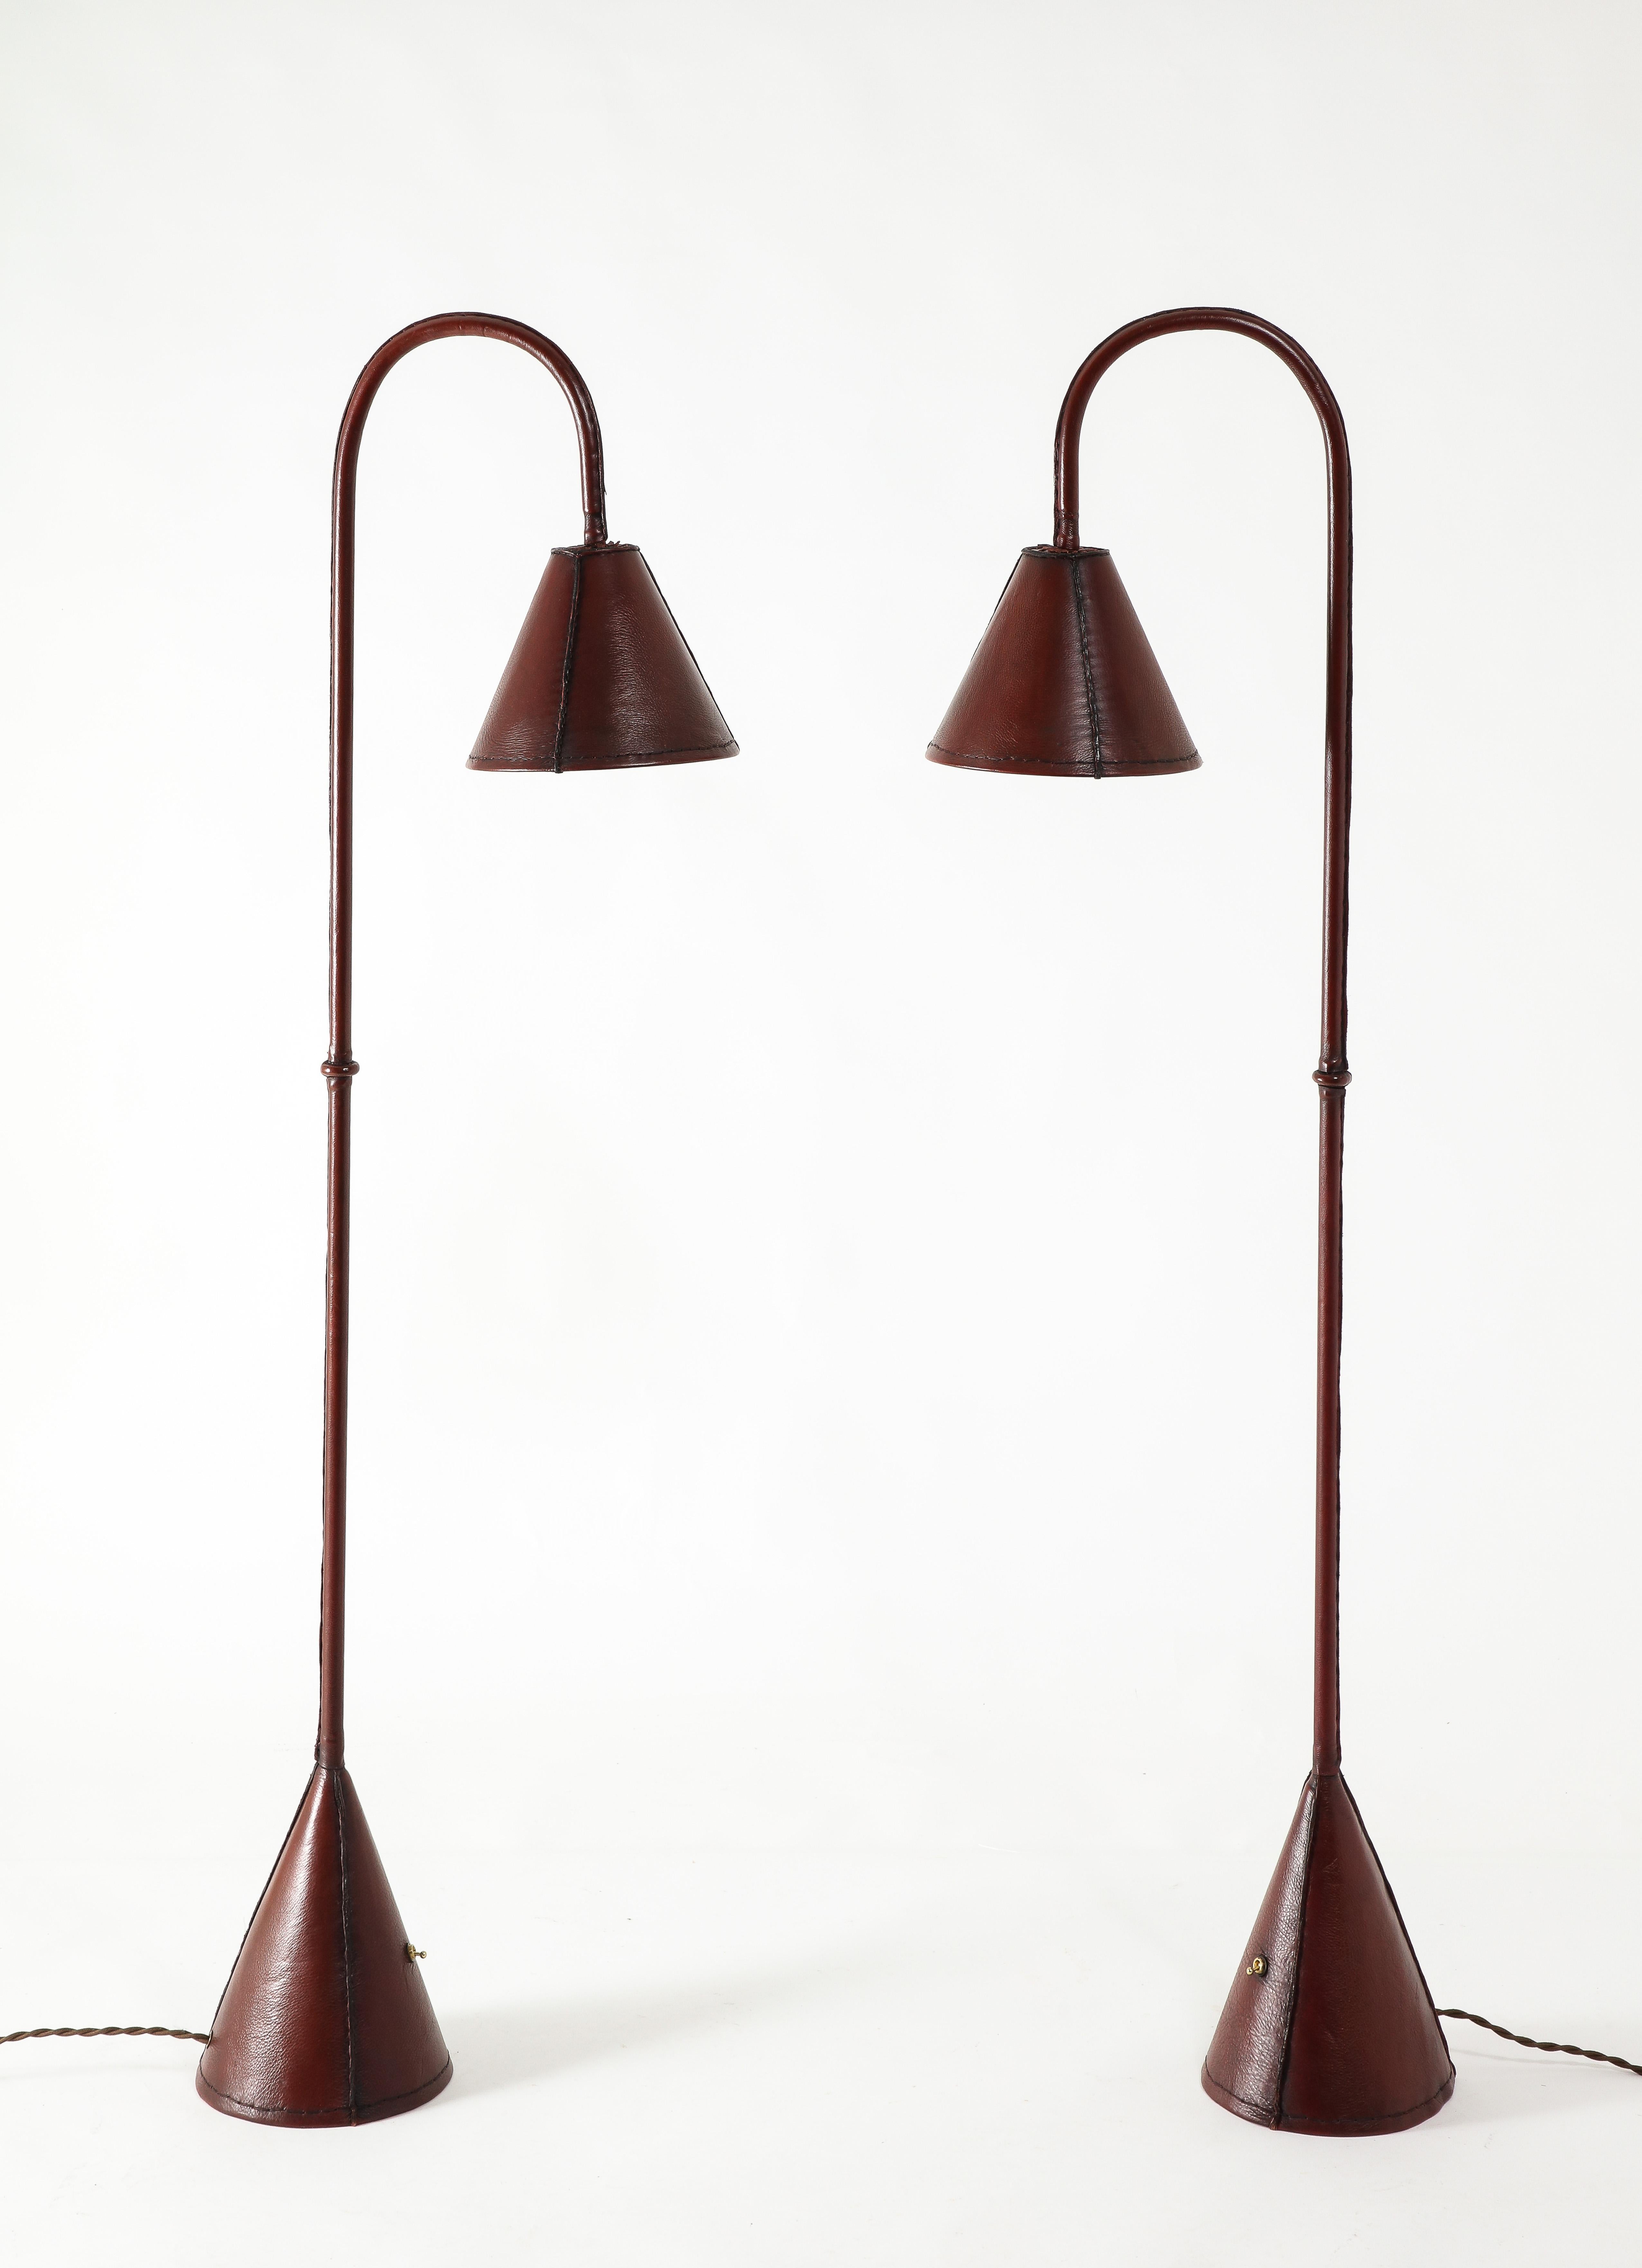 Pair of hand-stitched reading lamps in a rich deep burgundy leather. Great condition and rare as a pair.
